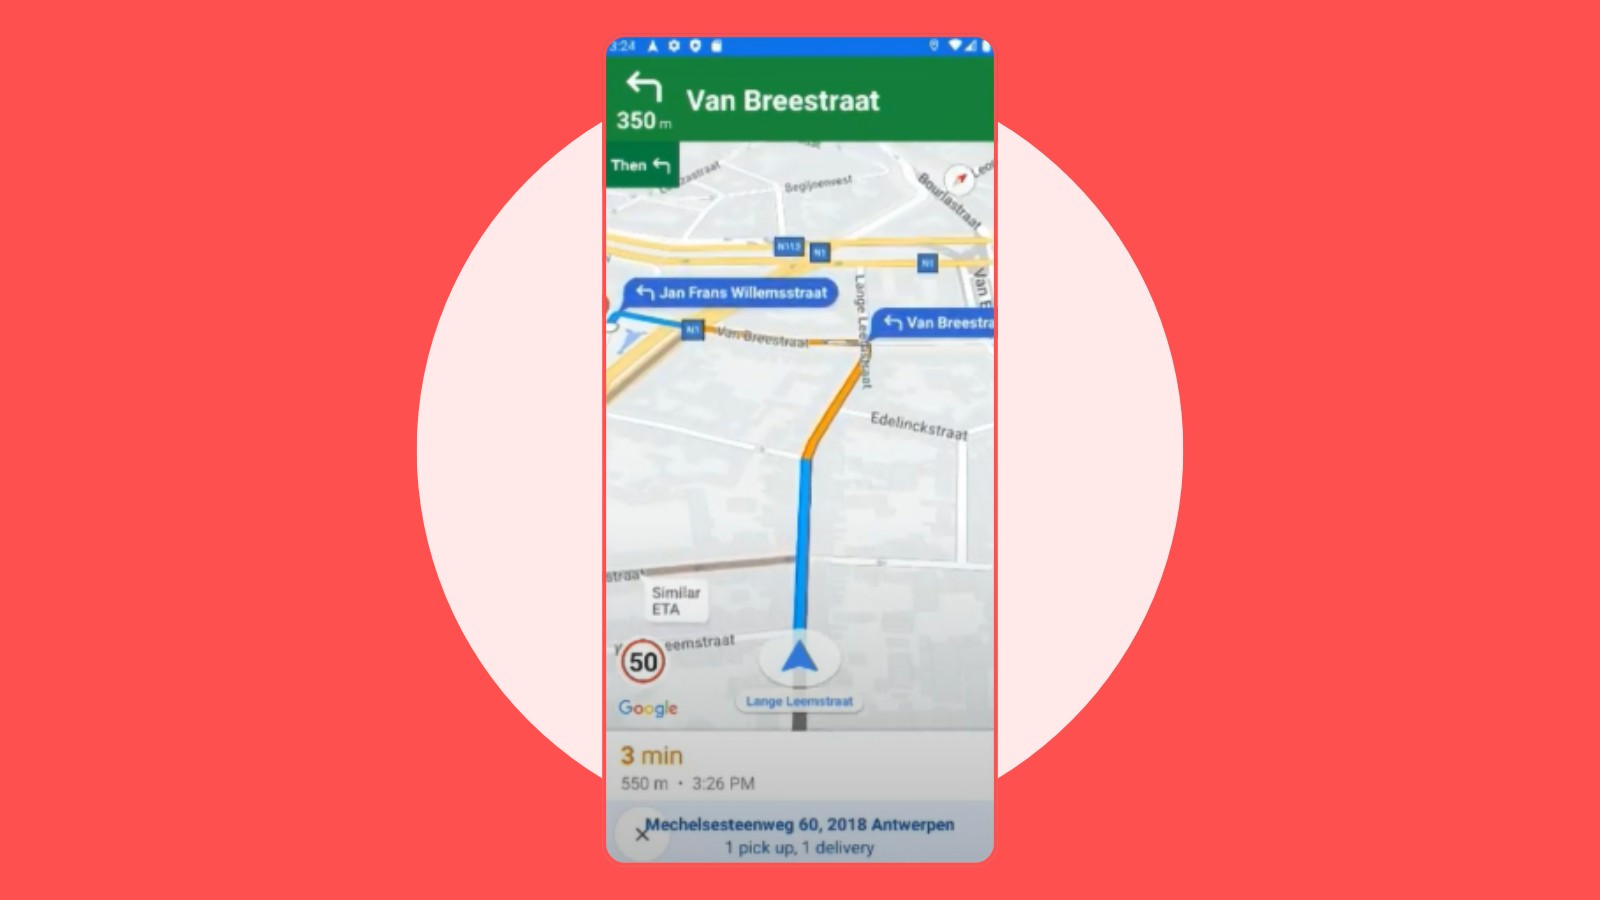 How to bring Google’s turn by turn navigation into your own mobile applications